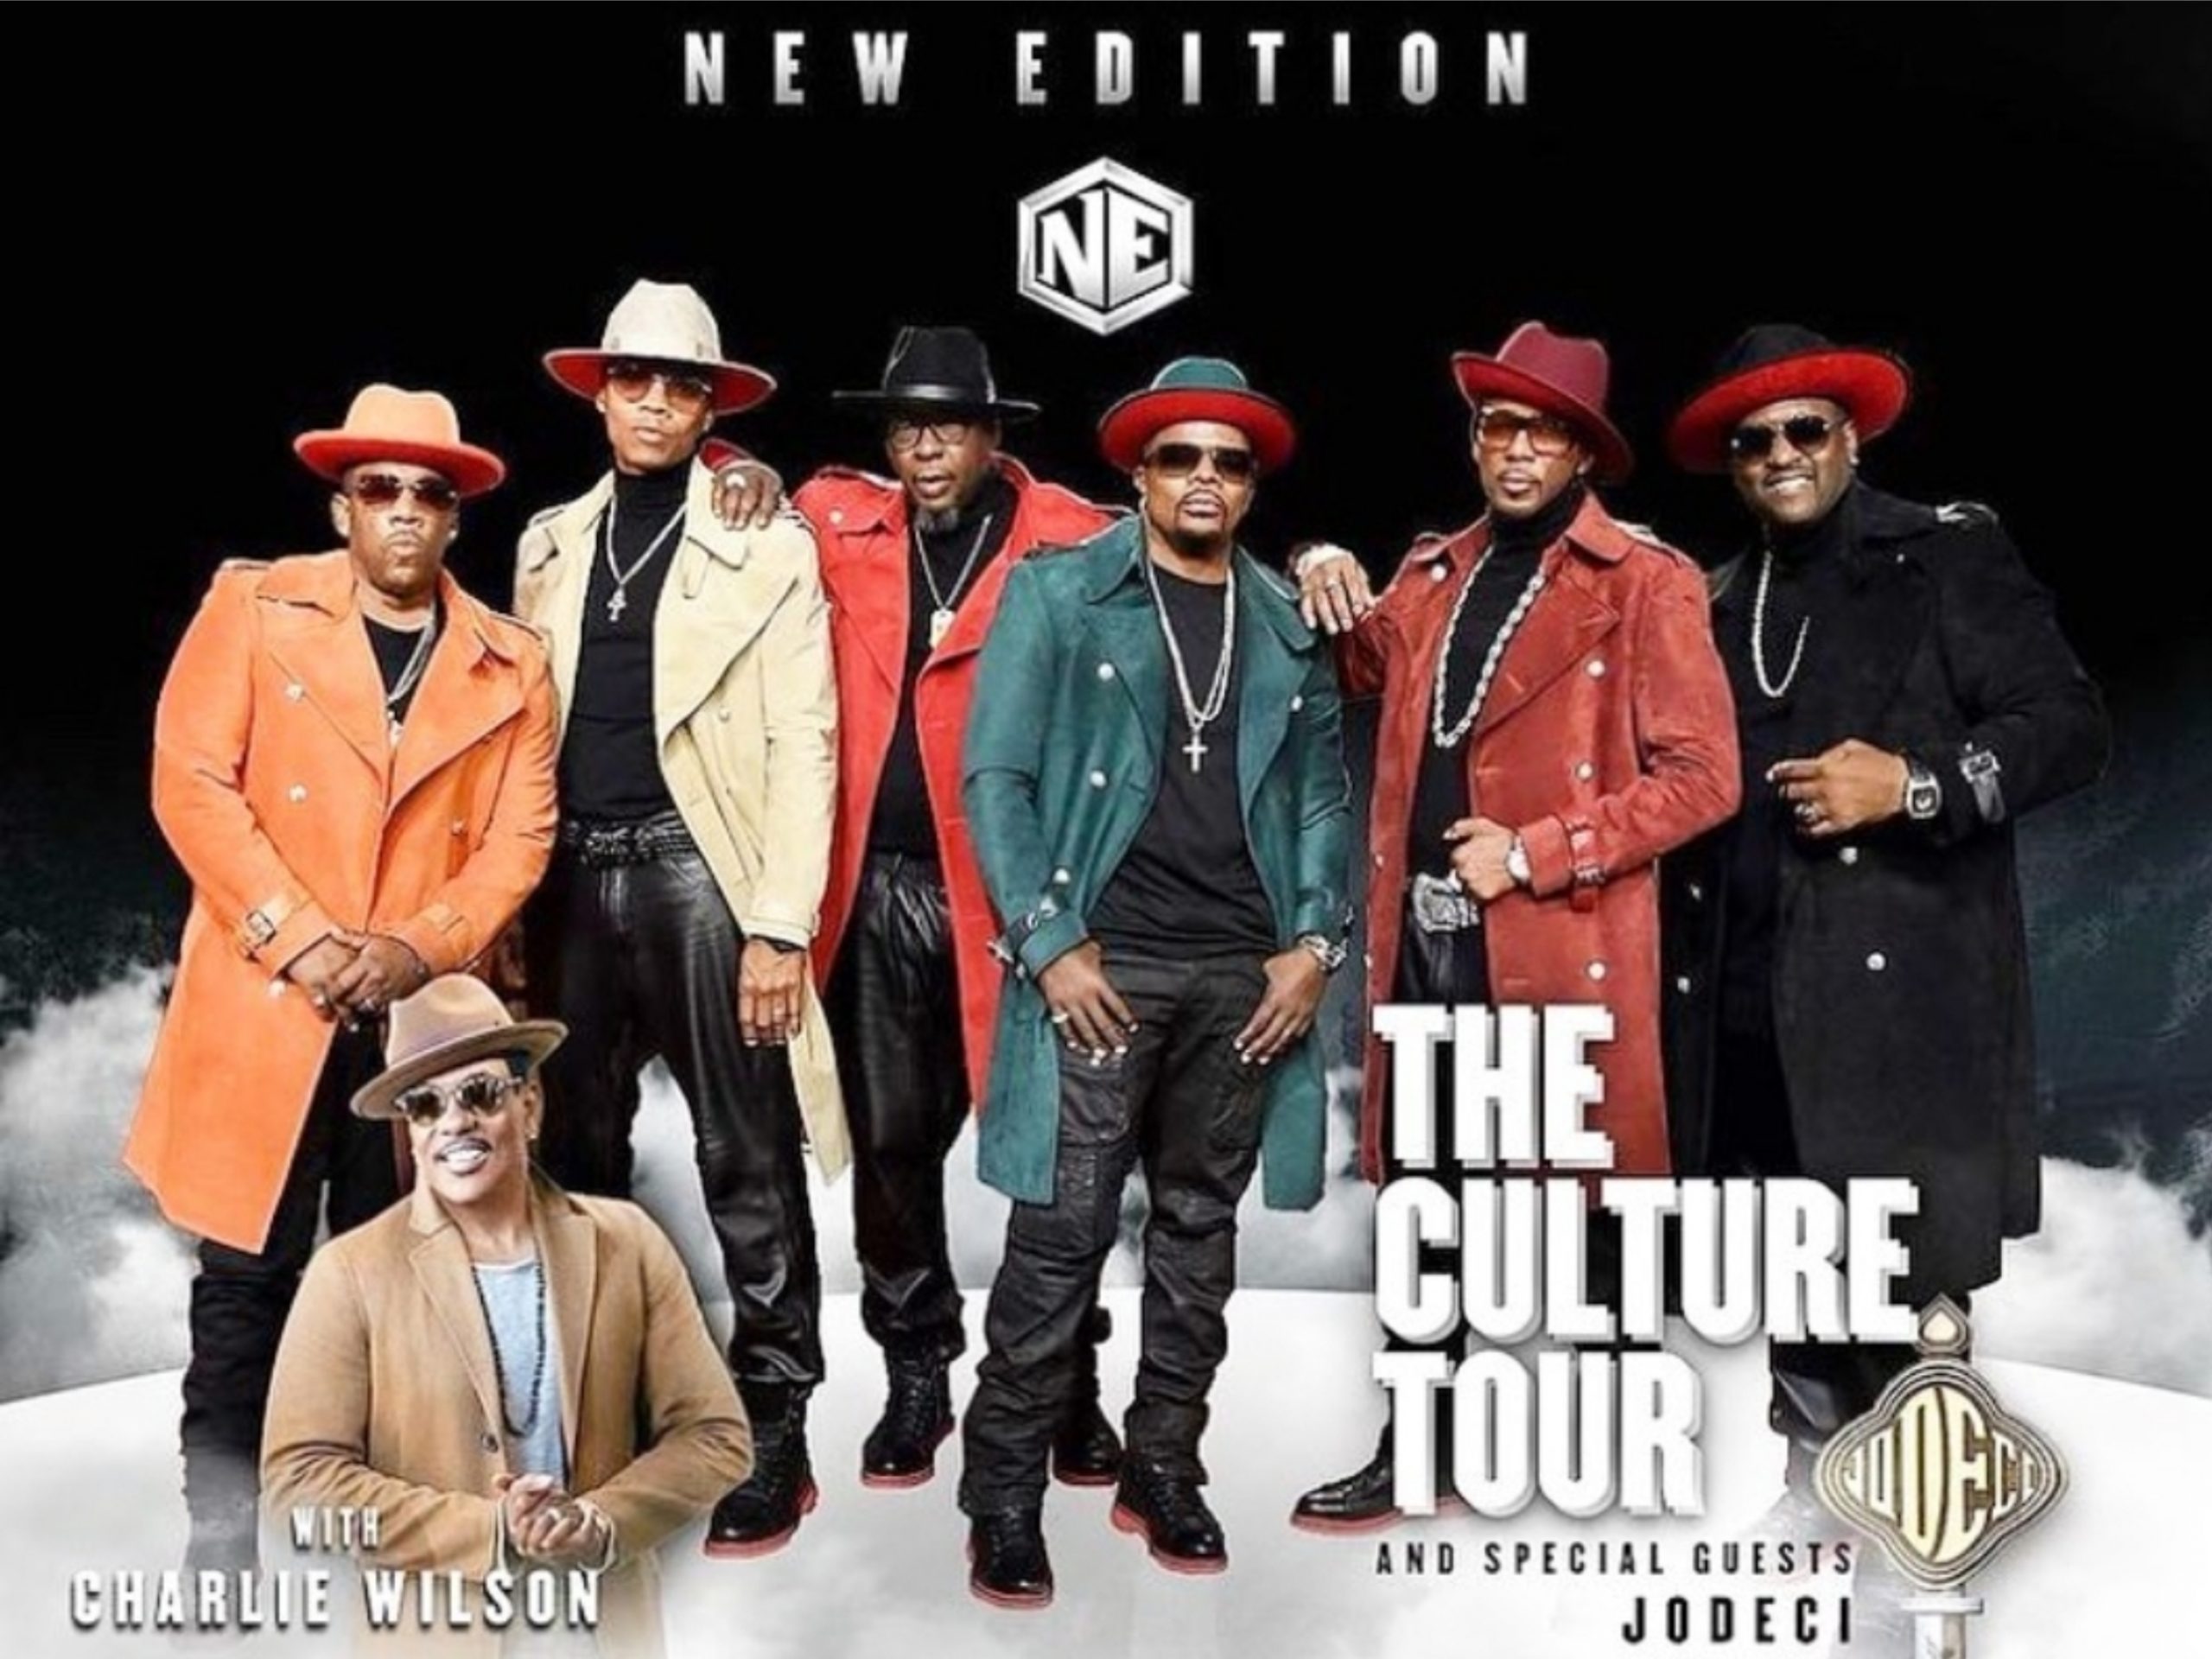 New Edition Announces Tour With Charlie Wilson and Jodeci